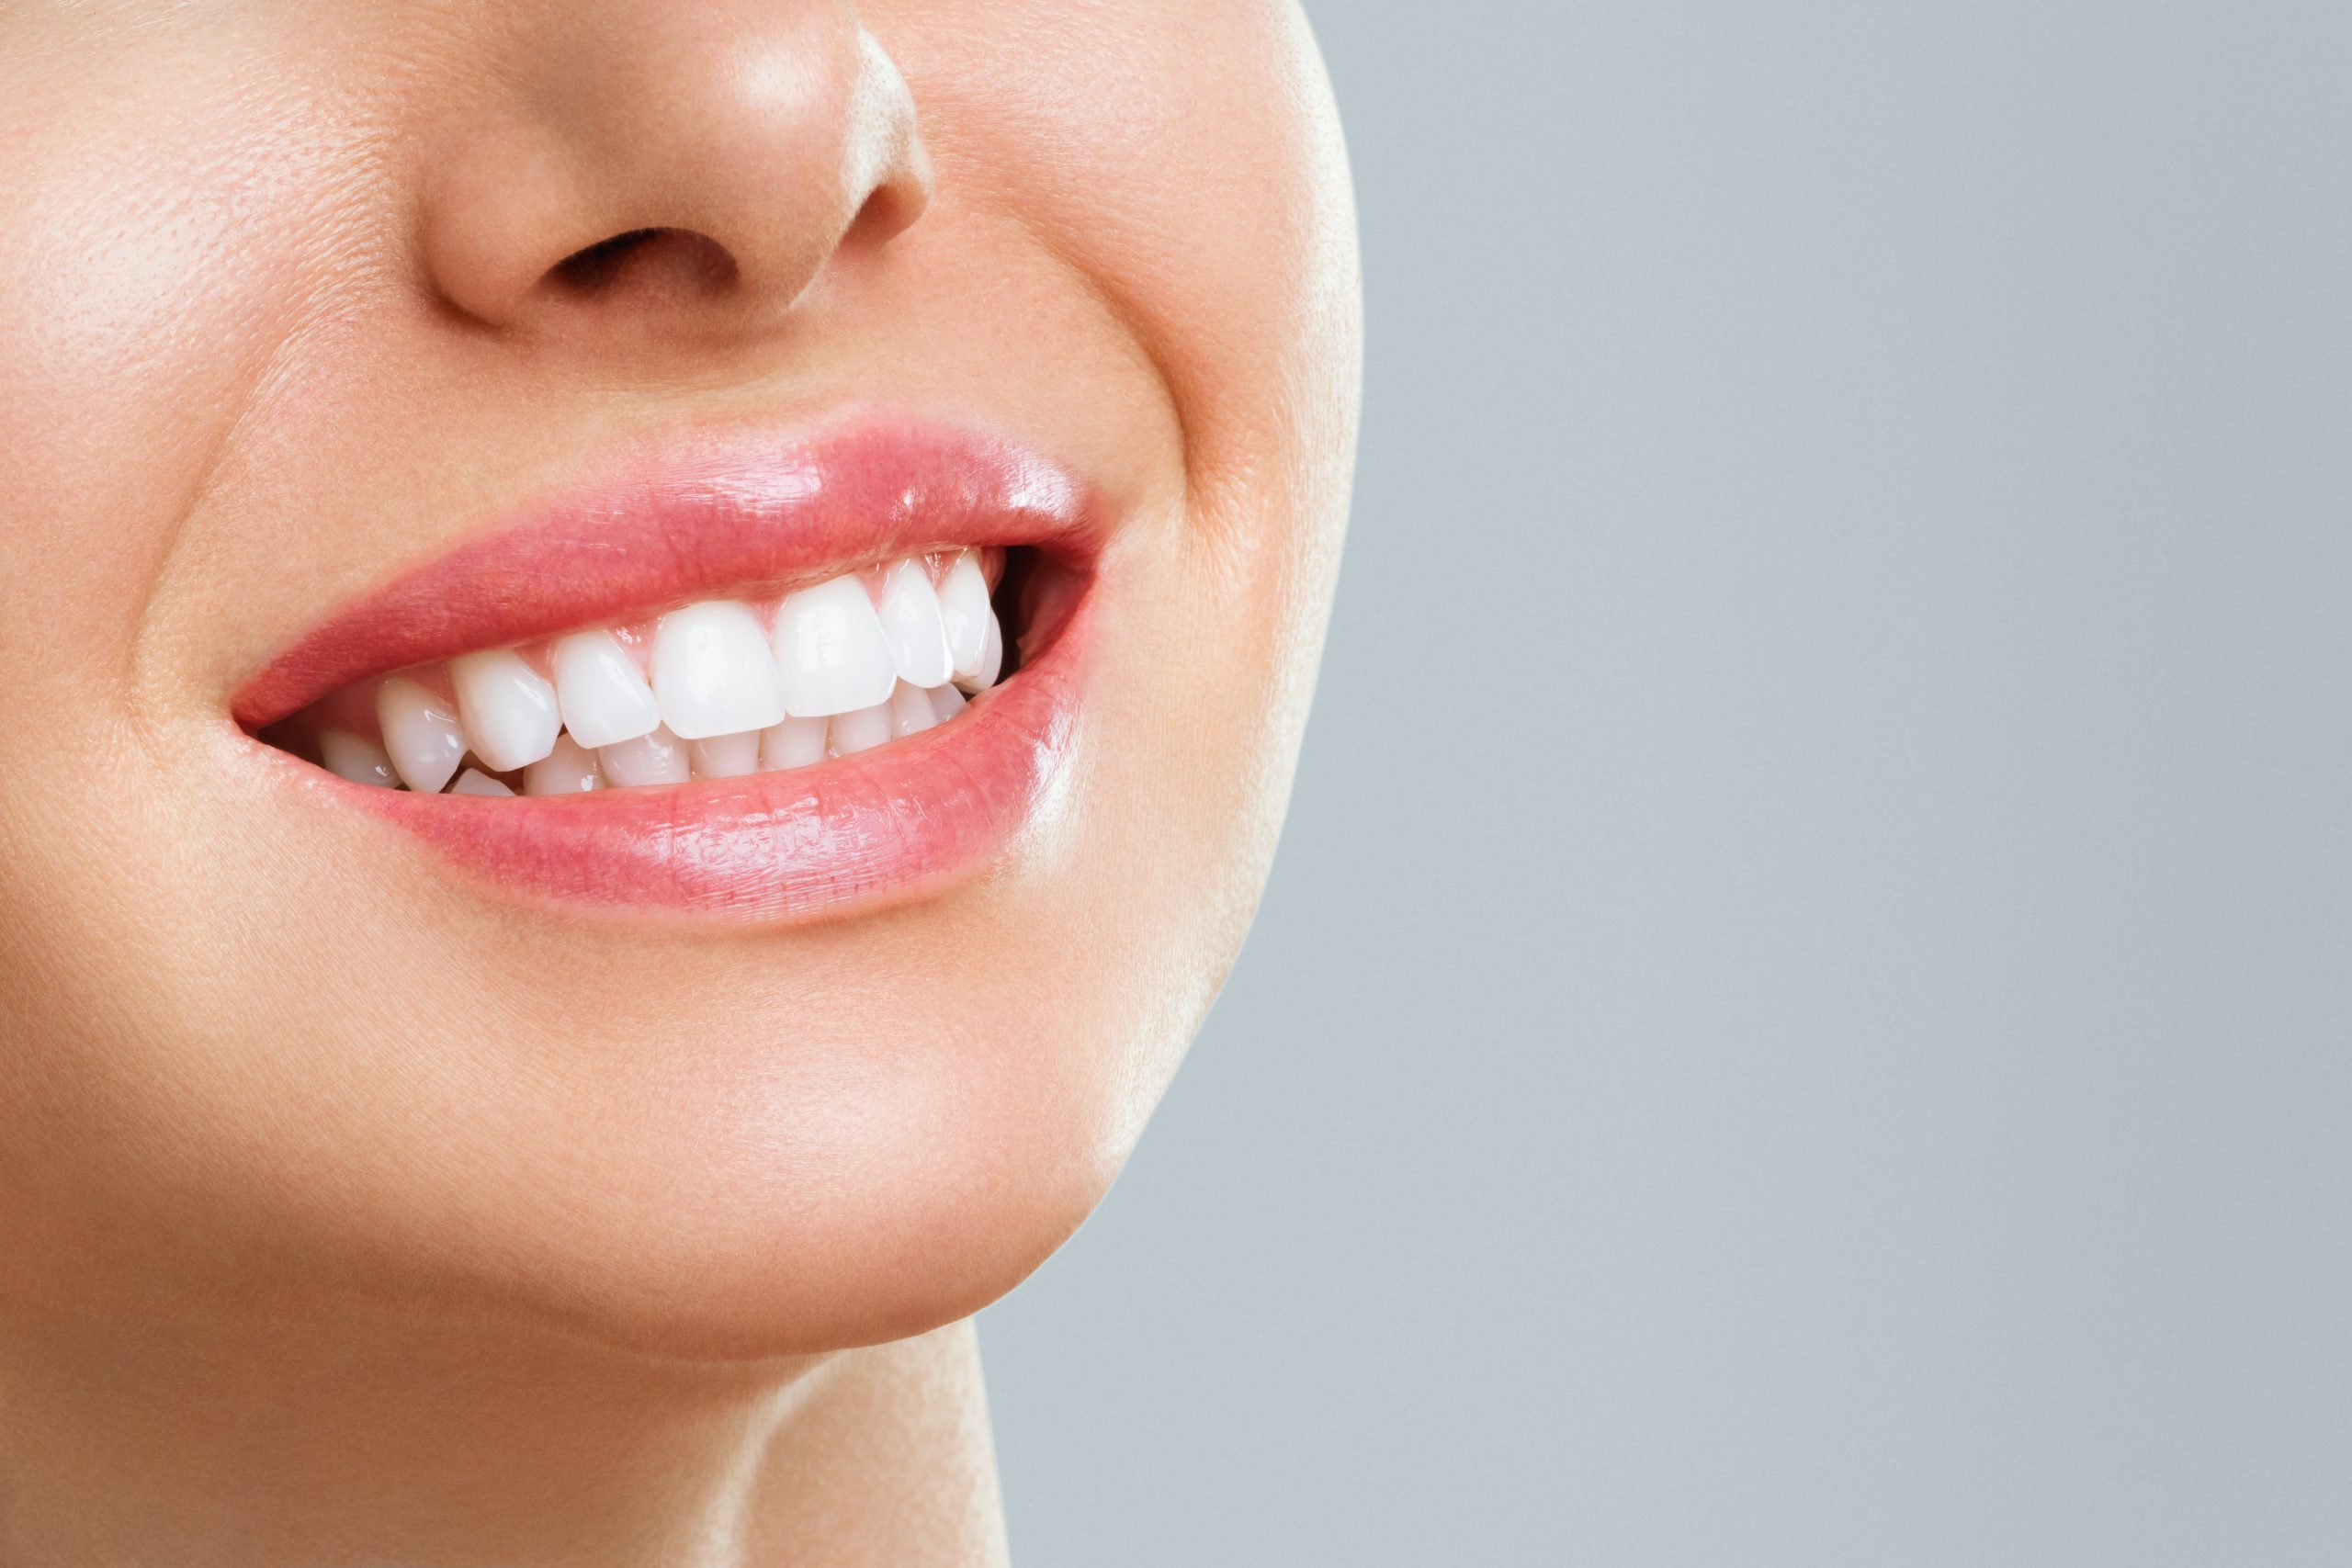 Skyview Ranch Dental Clinic: Your Top Choice for Invisalign in Calgary, AB